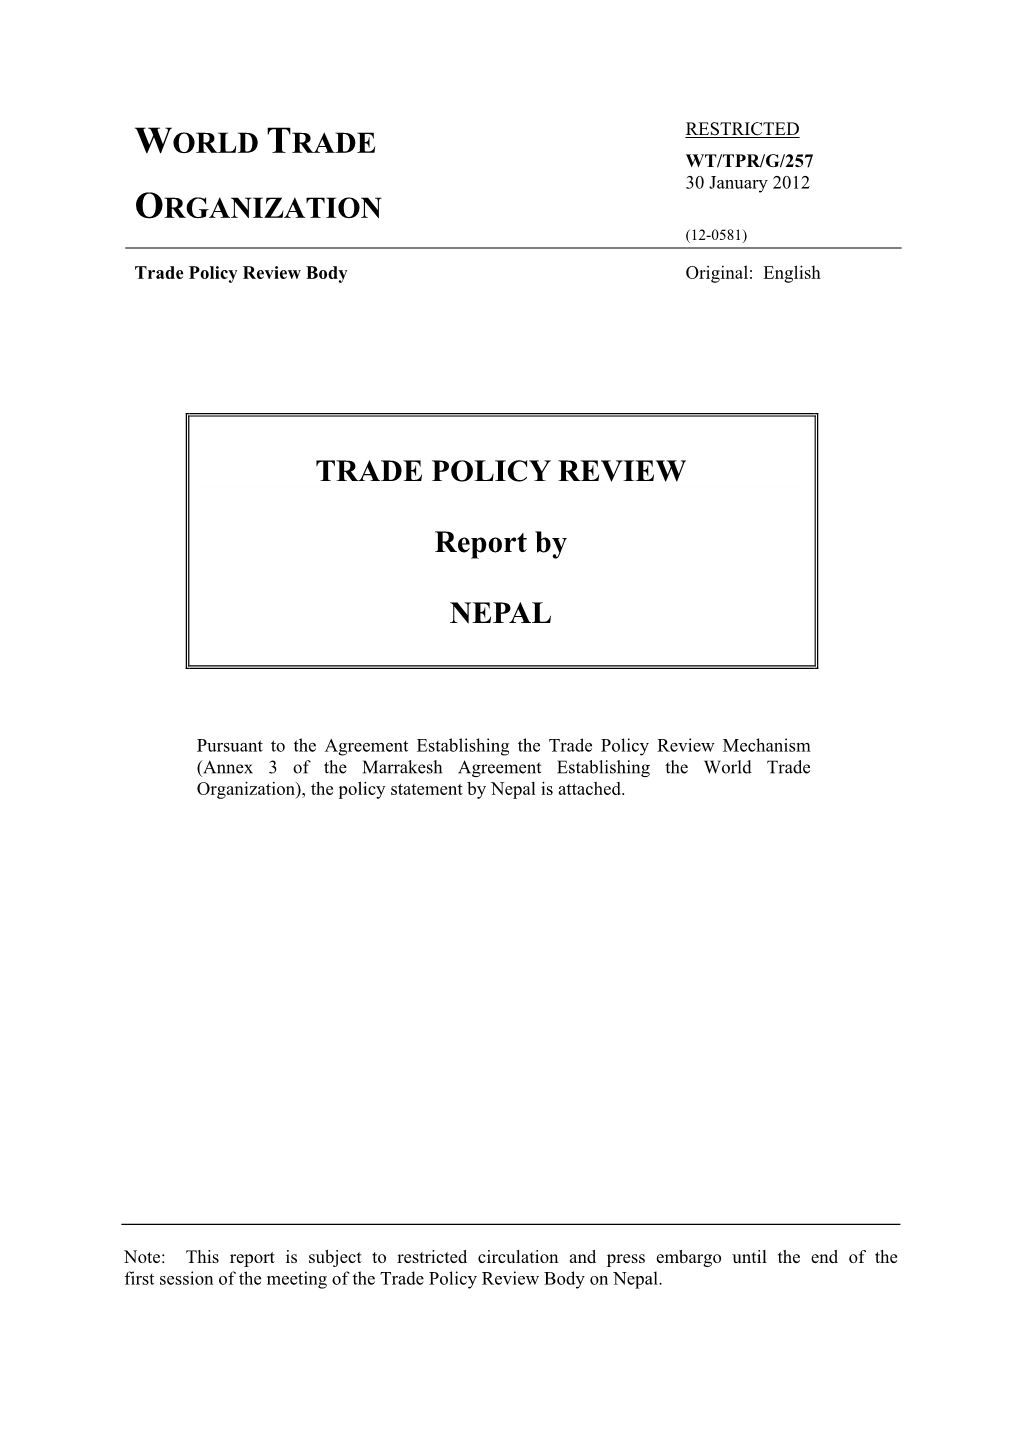 TRADE POLICY REVIEW Report by NEPAL